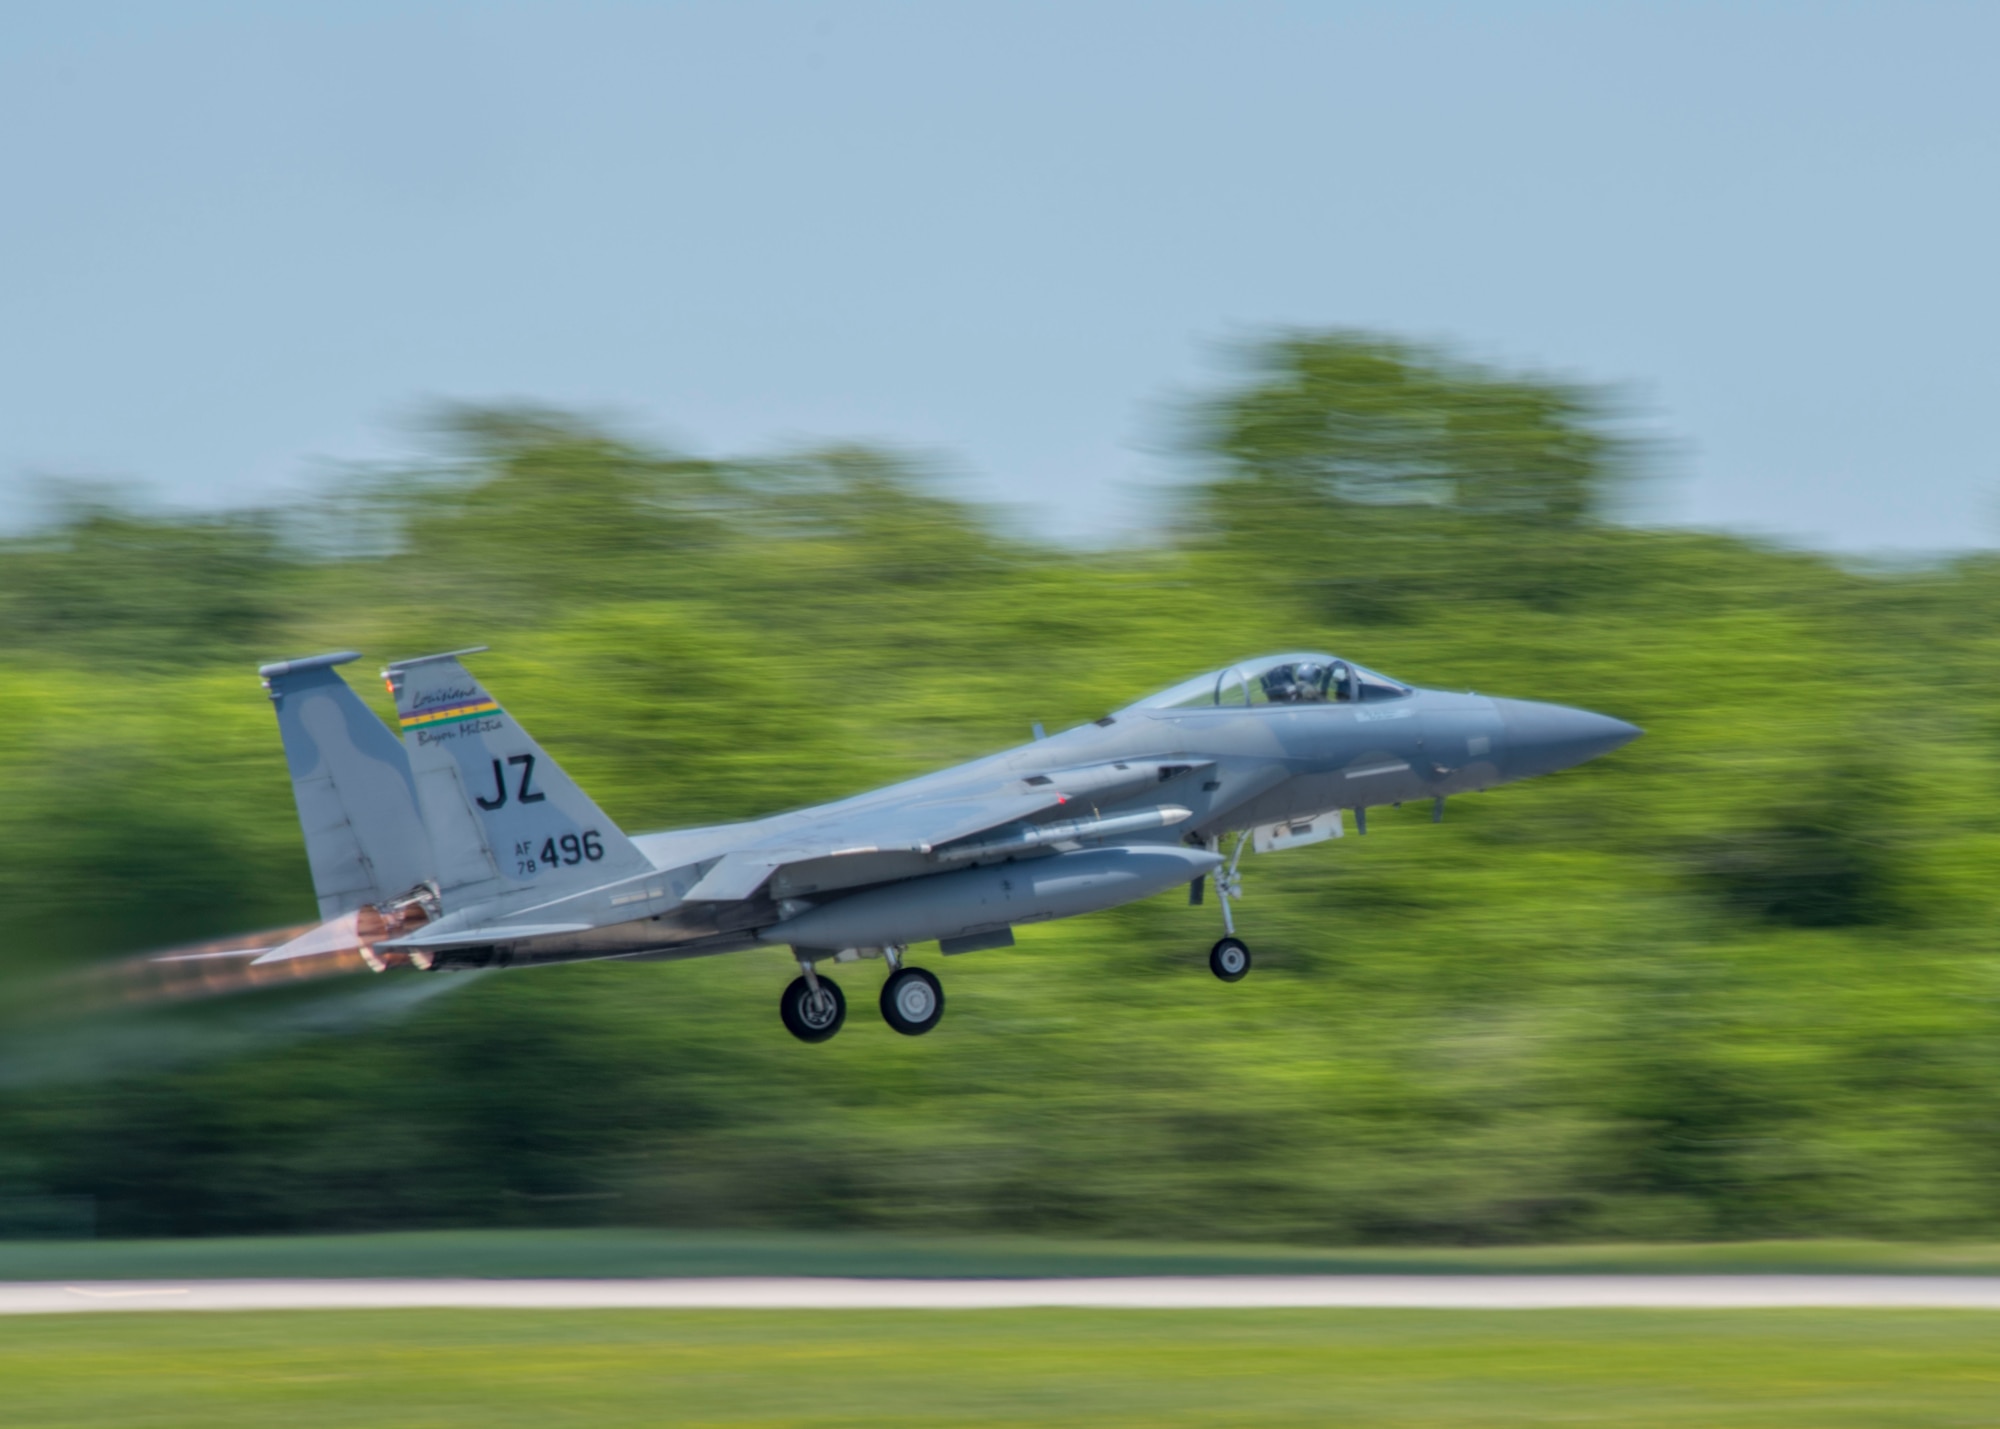 An F-15 Eagle from the Louisiana National Guard's 159th Fighter Wing takes off down the runway, April 10, 2019, on Naval Air Station Joint Reserve Base New Orleans, La. Lt. Col. Mark Sletten, 8th FS commander, said the unit set up simulated combat scenarios so the student pilots could practice working as a team with another unit. (U.S. Air Force photo by Airman 1st Class Kindra Stewart)